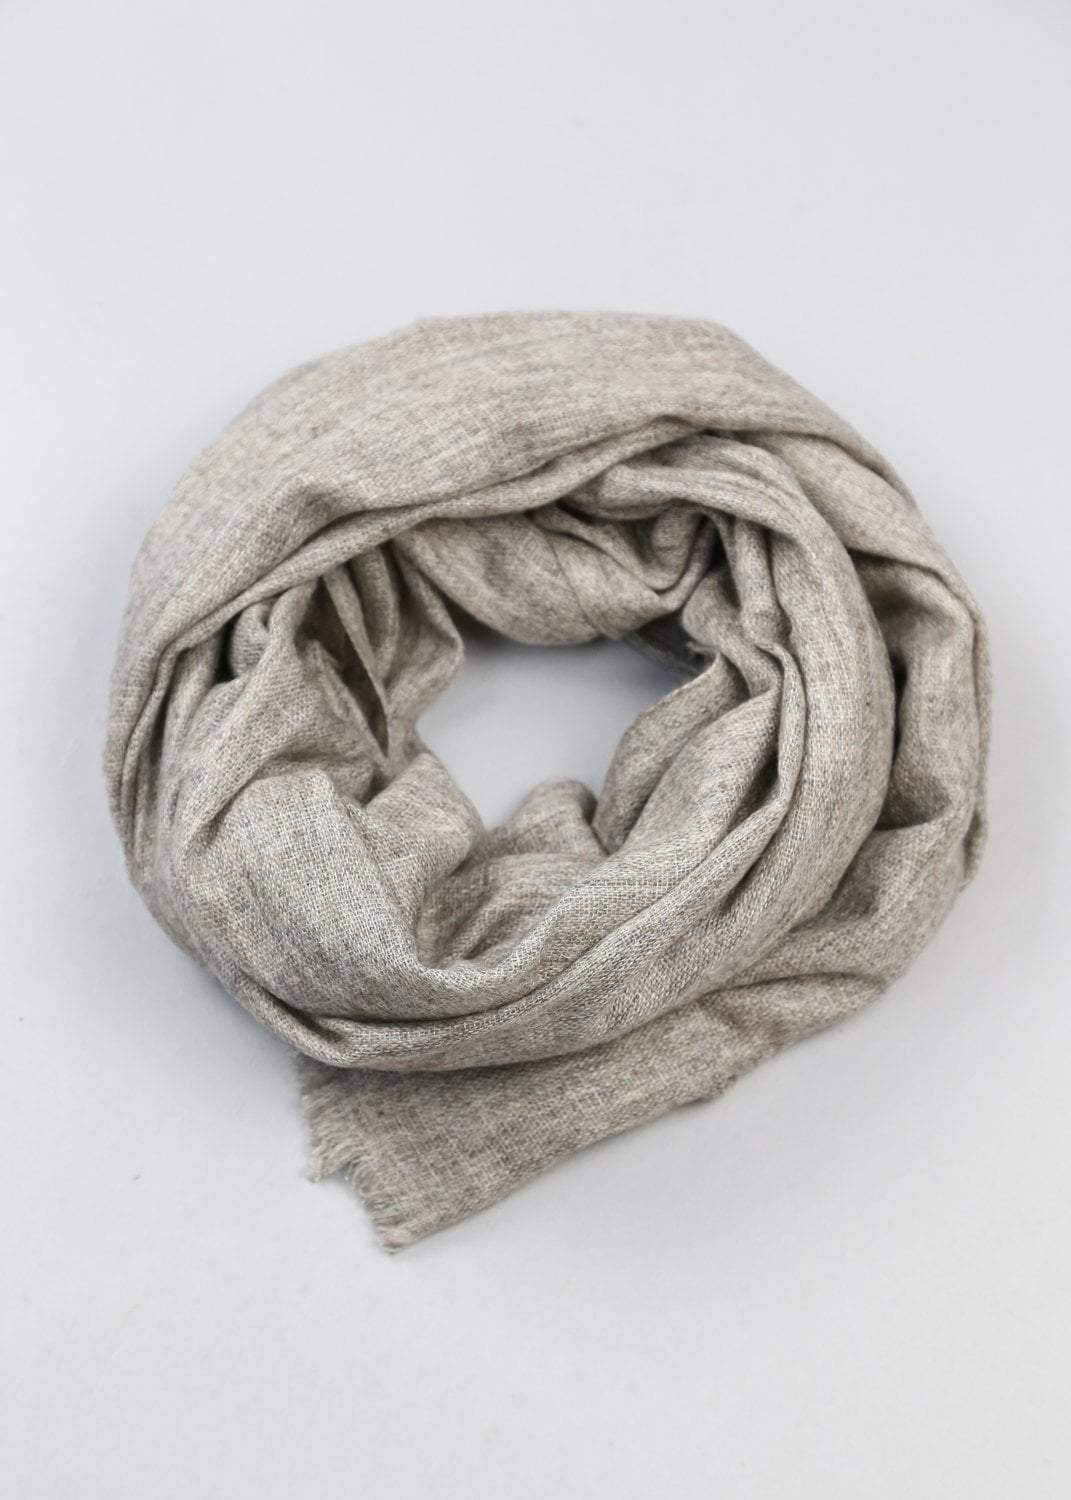 Pure Cashmere Scarf - 100% Cashmere - Made in Nepal – Borges & Scott